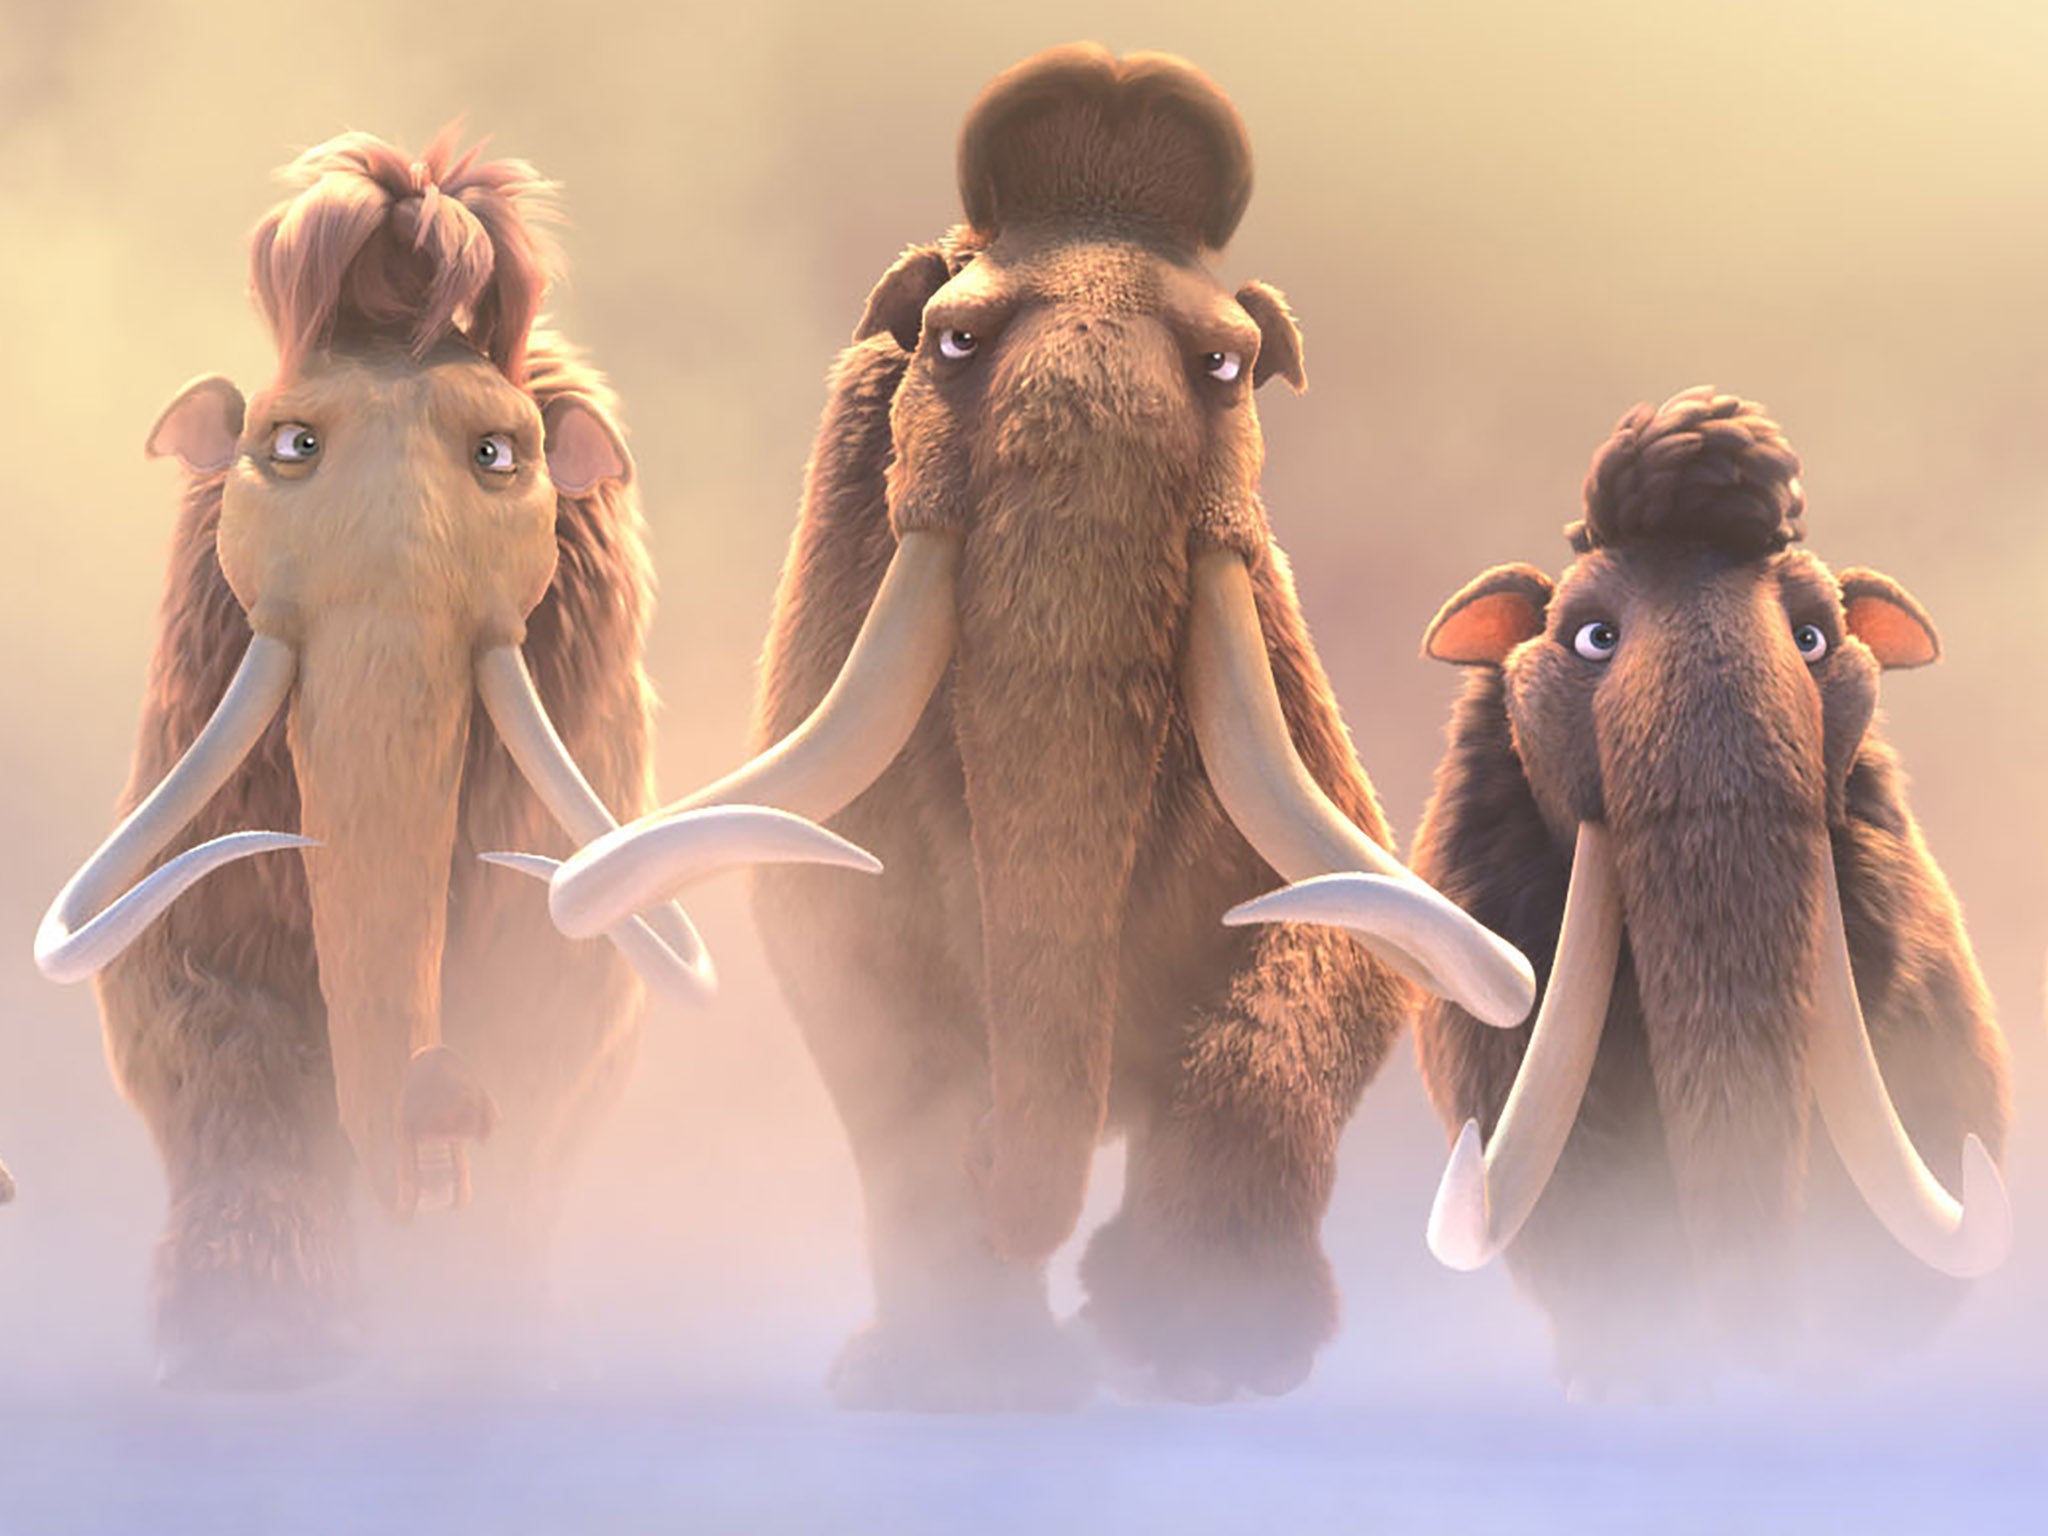 Tonight’s dinner? Woolly mammoths in the 2016 film ‘Ice Age: Collision Course'